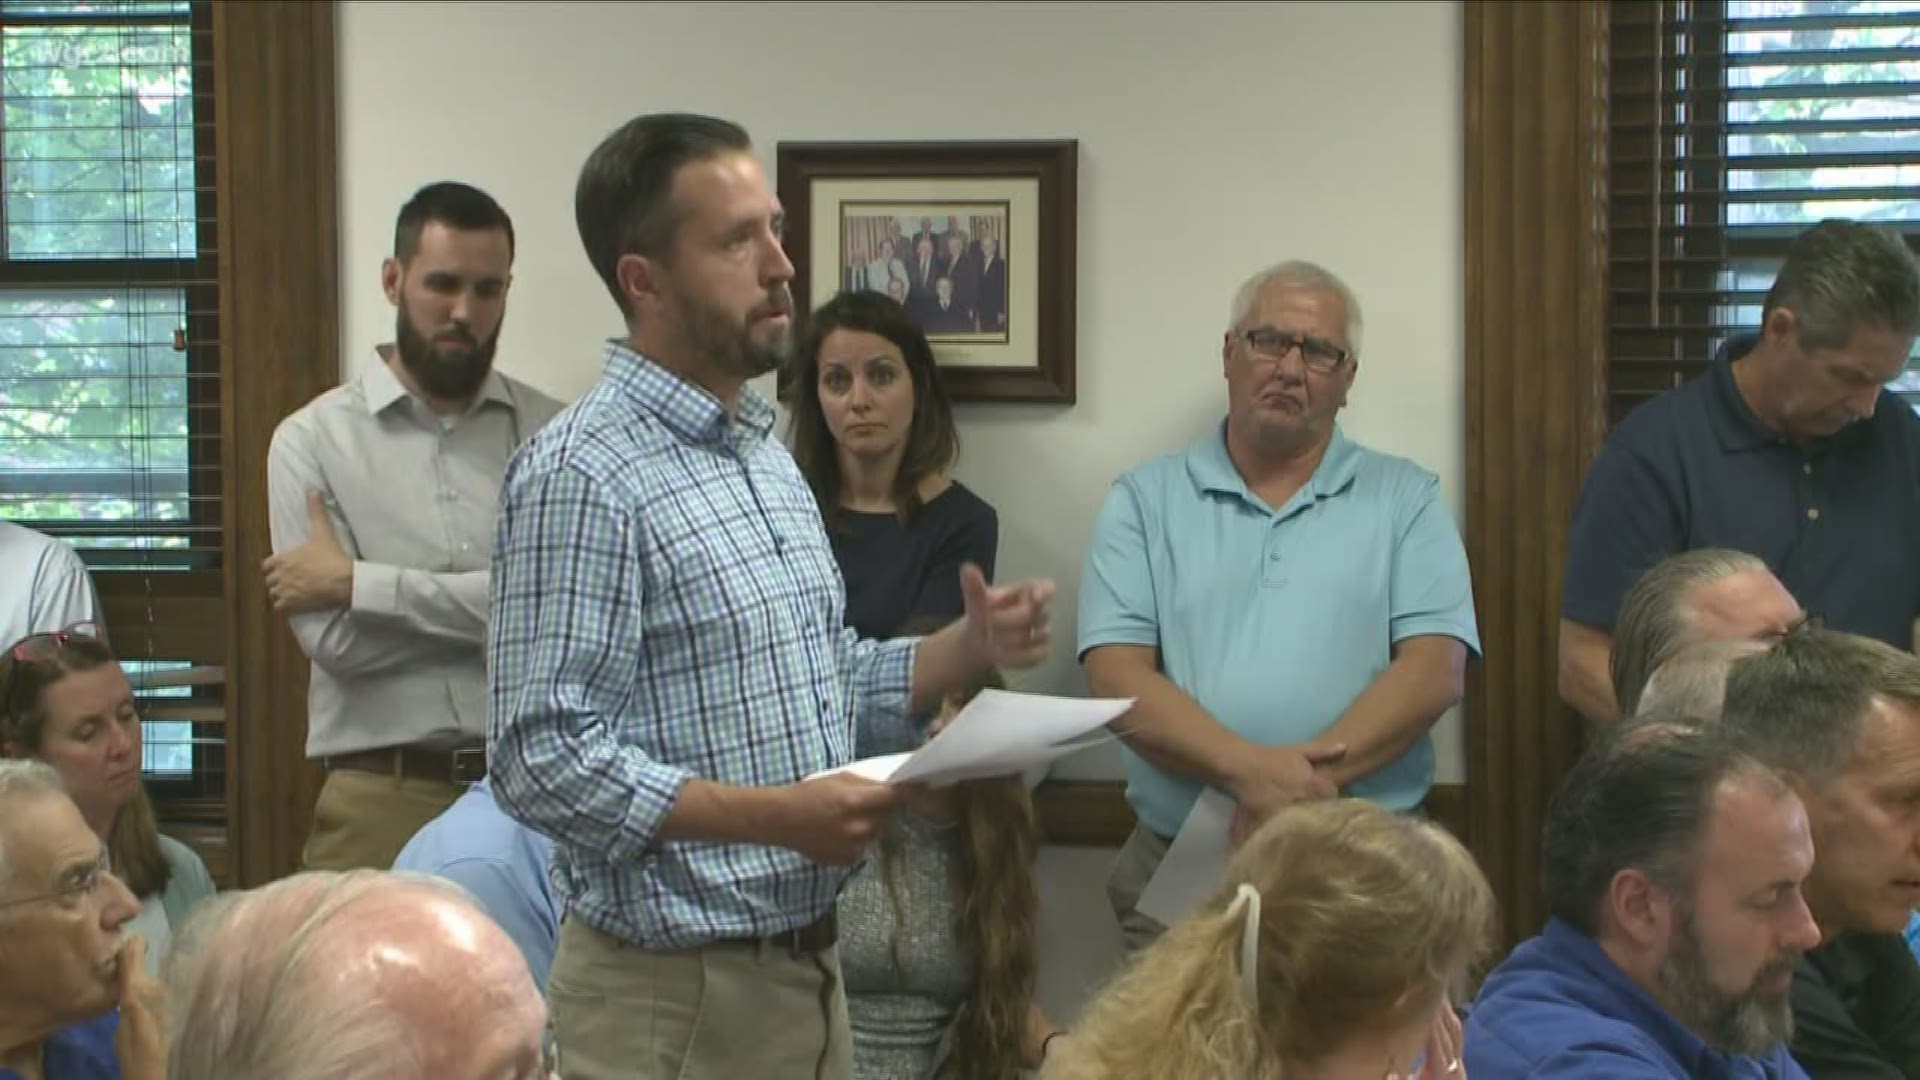 The village of East Aurora voted tonight to ban plastic straws and stir sticks. This is all because of a local boy scout who wanted to help the environment.